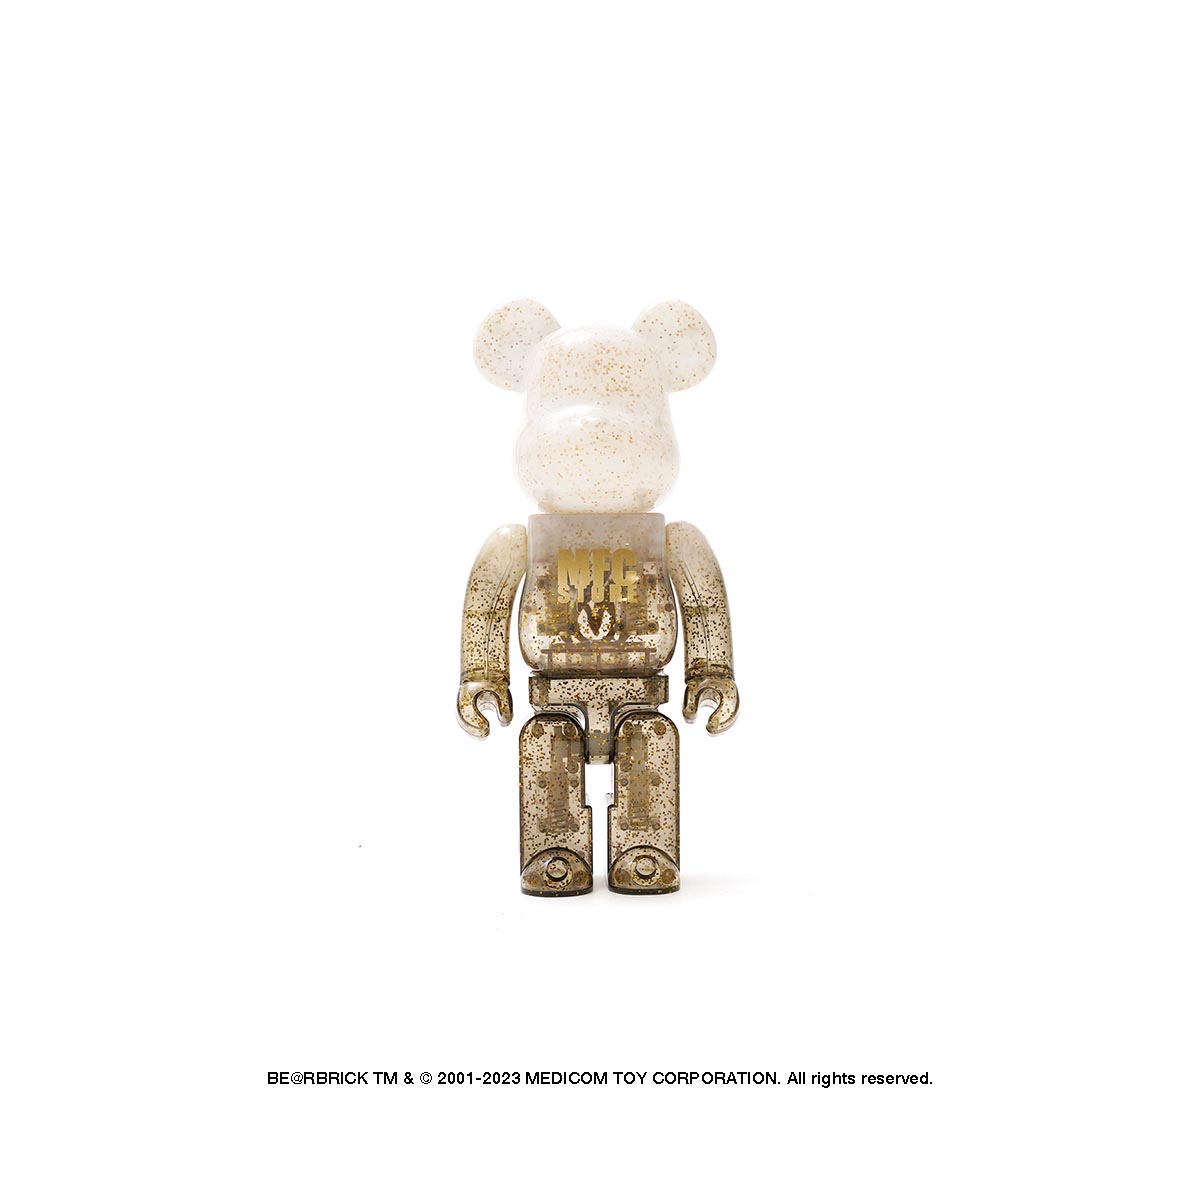 MFC STORE × BE@RBRICK、コラボアイテム発売